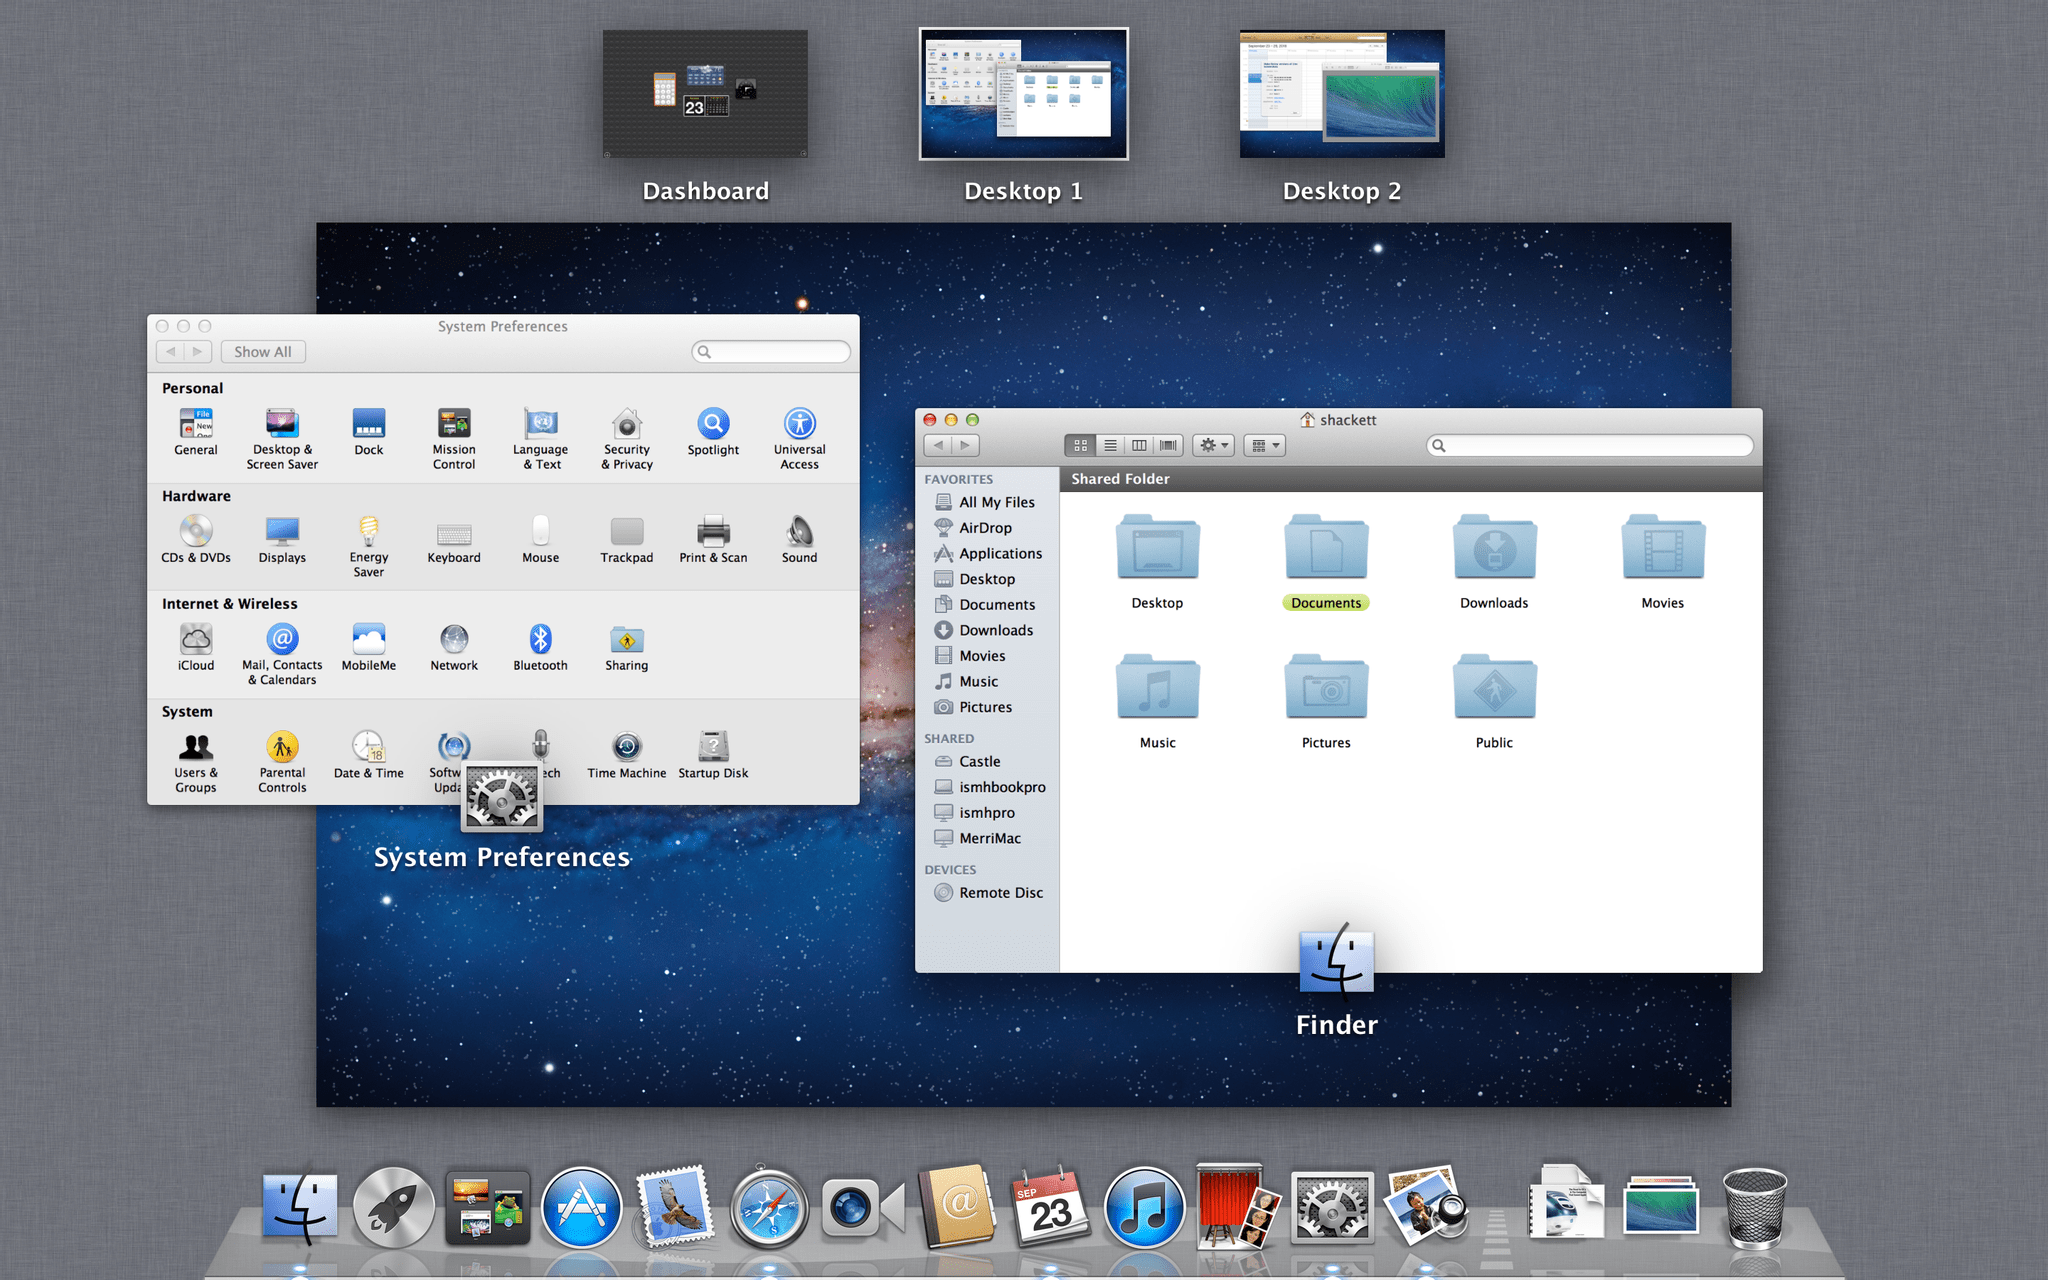 In 2011, as part of OS X Lion, Apple introduced 'Mission Control', which lets you see an overview of all your open windows, fullscreen apps, and spaces. Source: [512 Pixels macOS Screenshot Library](https://feed.feedburster.com/macstoriesnet/redirect?url=https://512pixels.net/projects/aqua-screenshot-library/mac-os-x-10-7-lion/)